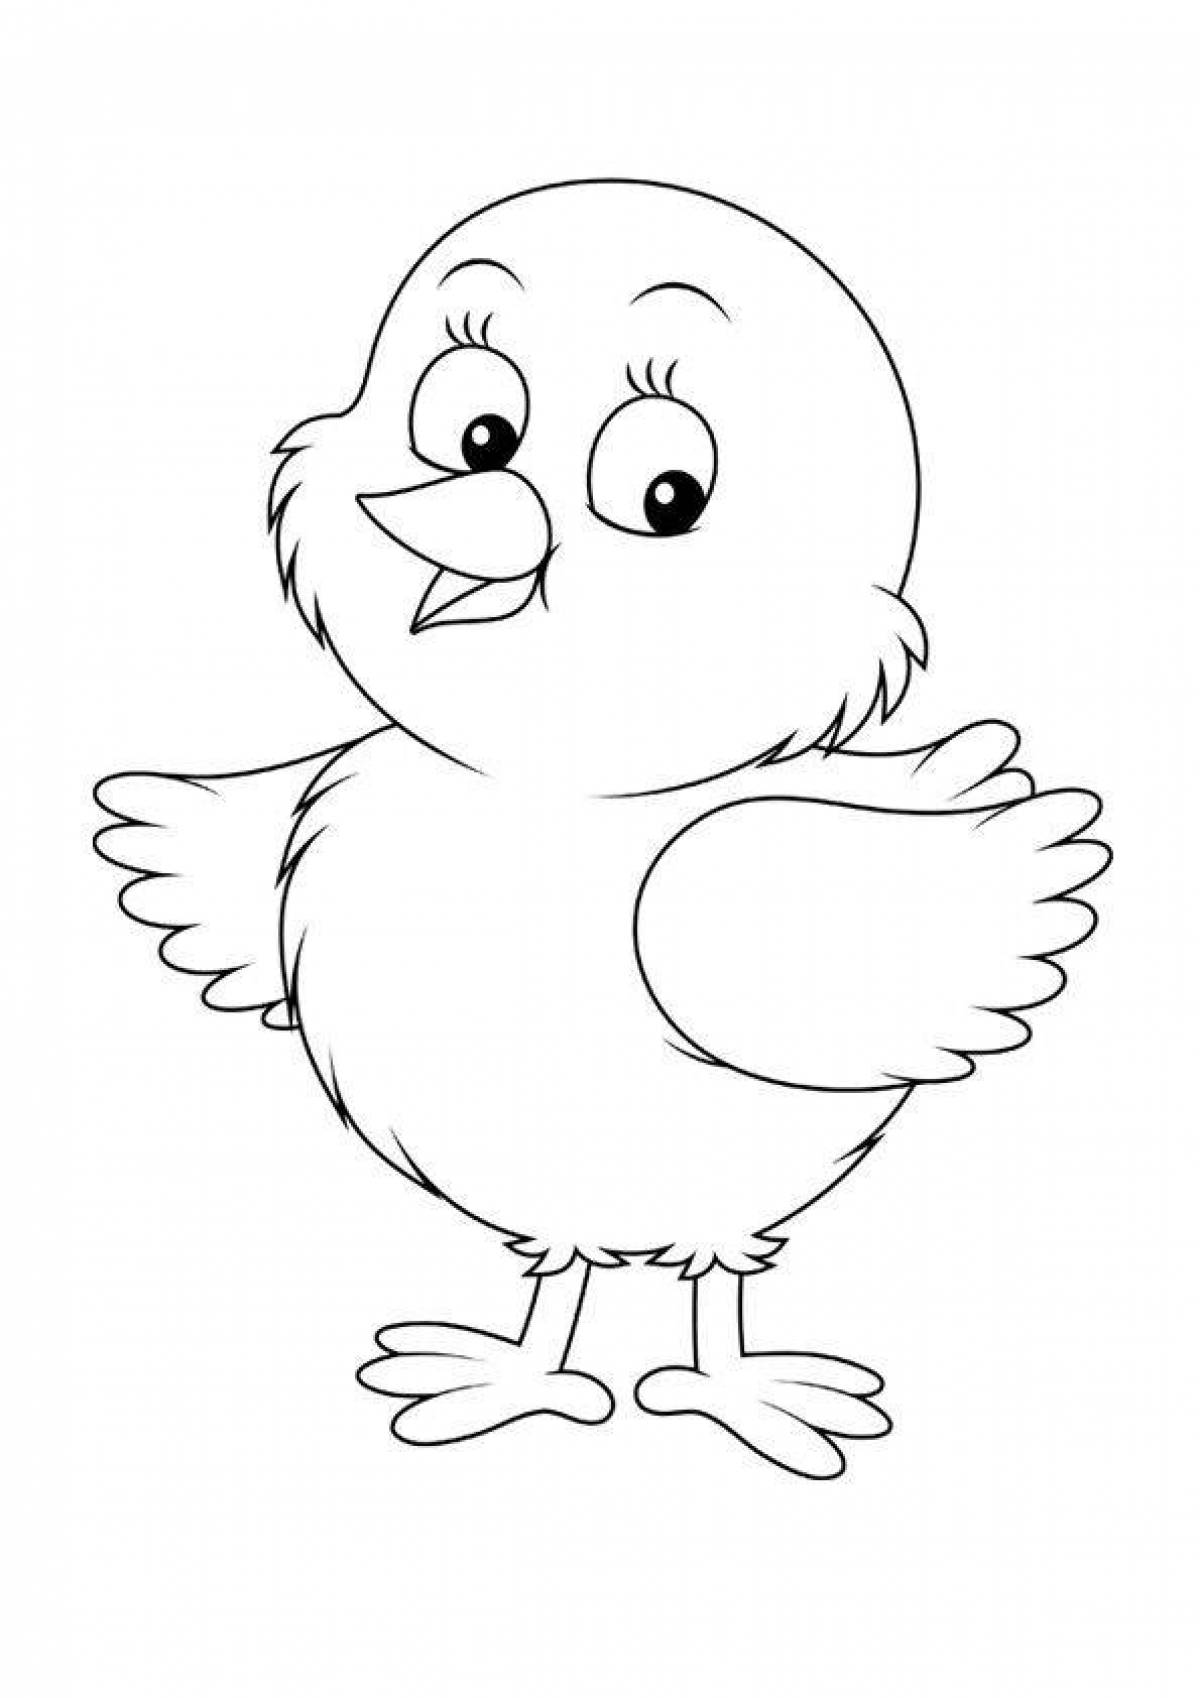 Pretty chick coloring book for 2-3 year olds